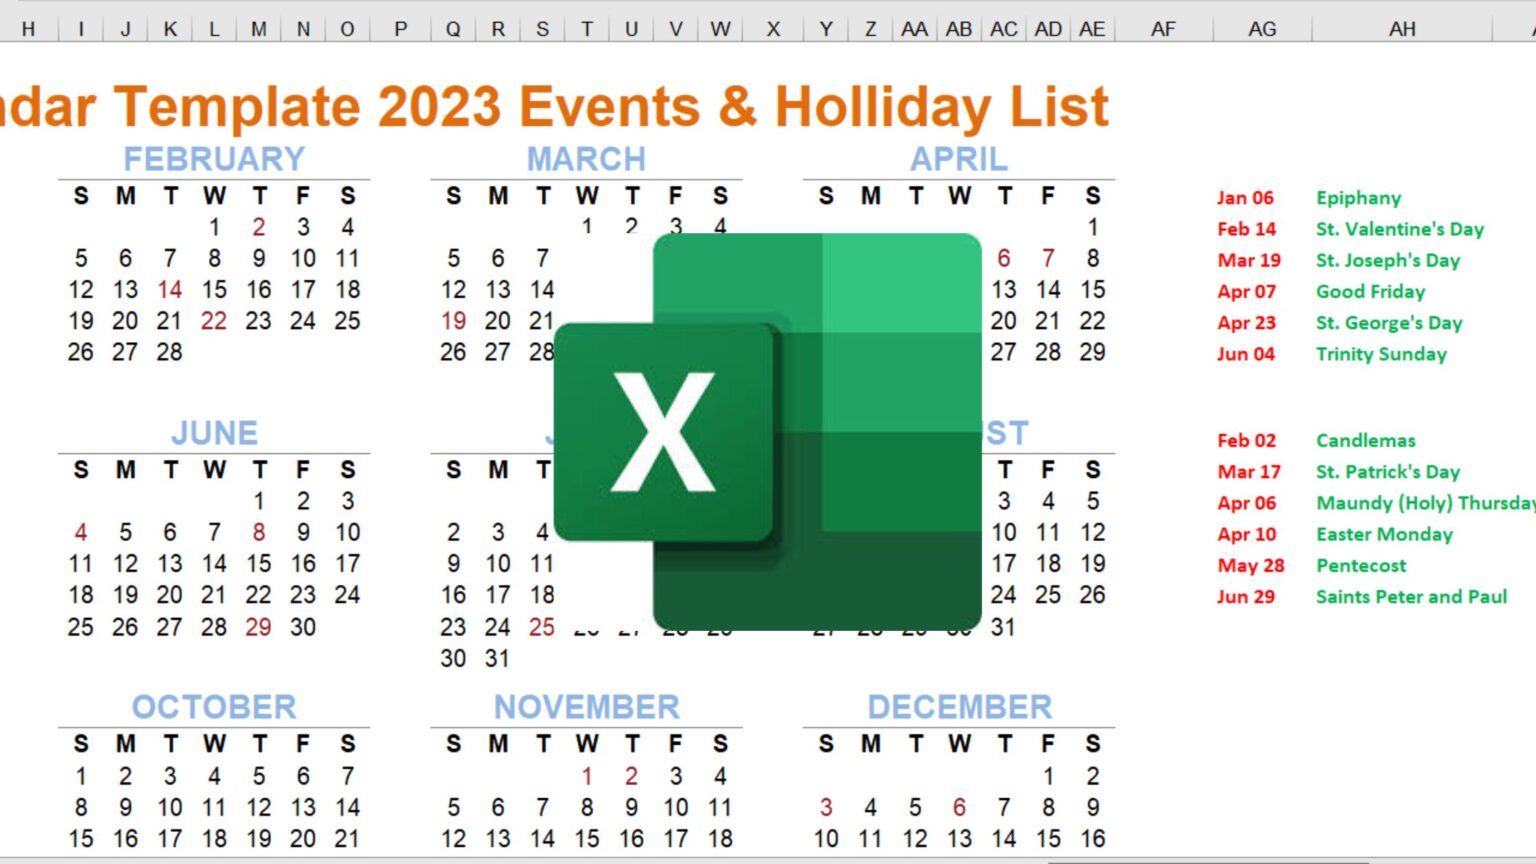 Download Printable Excel Calendar Template 2023 With Events & Holiday List - Times MD